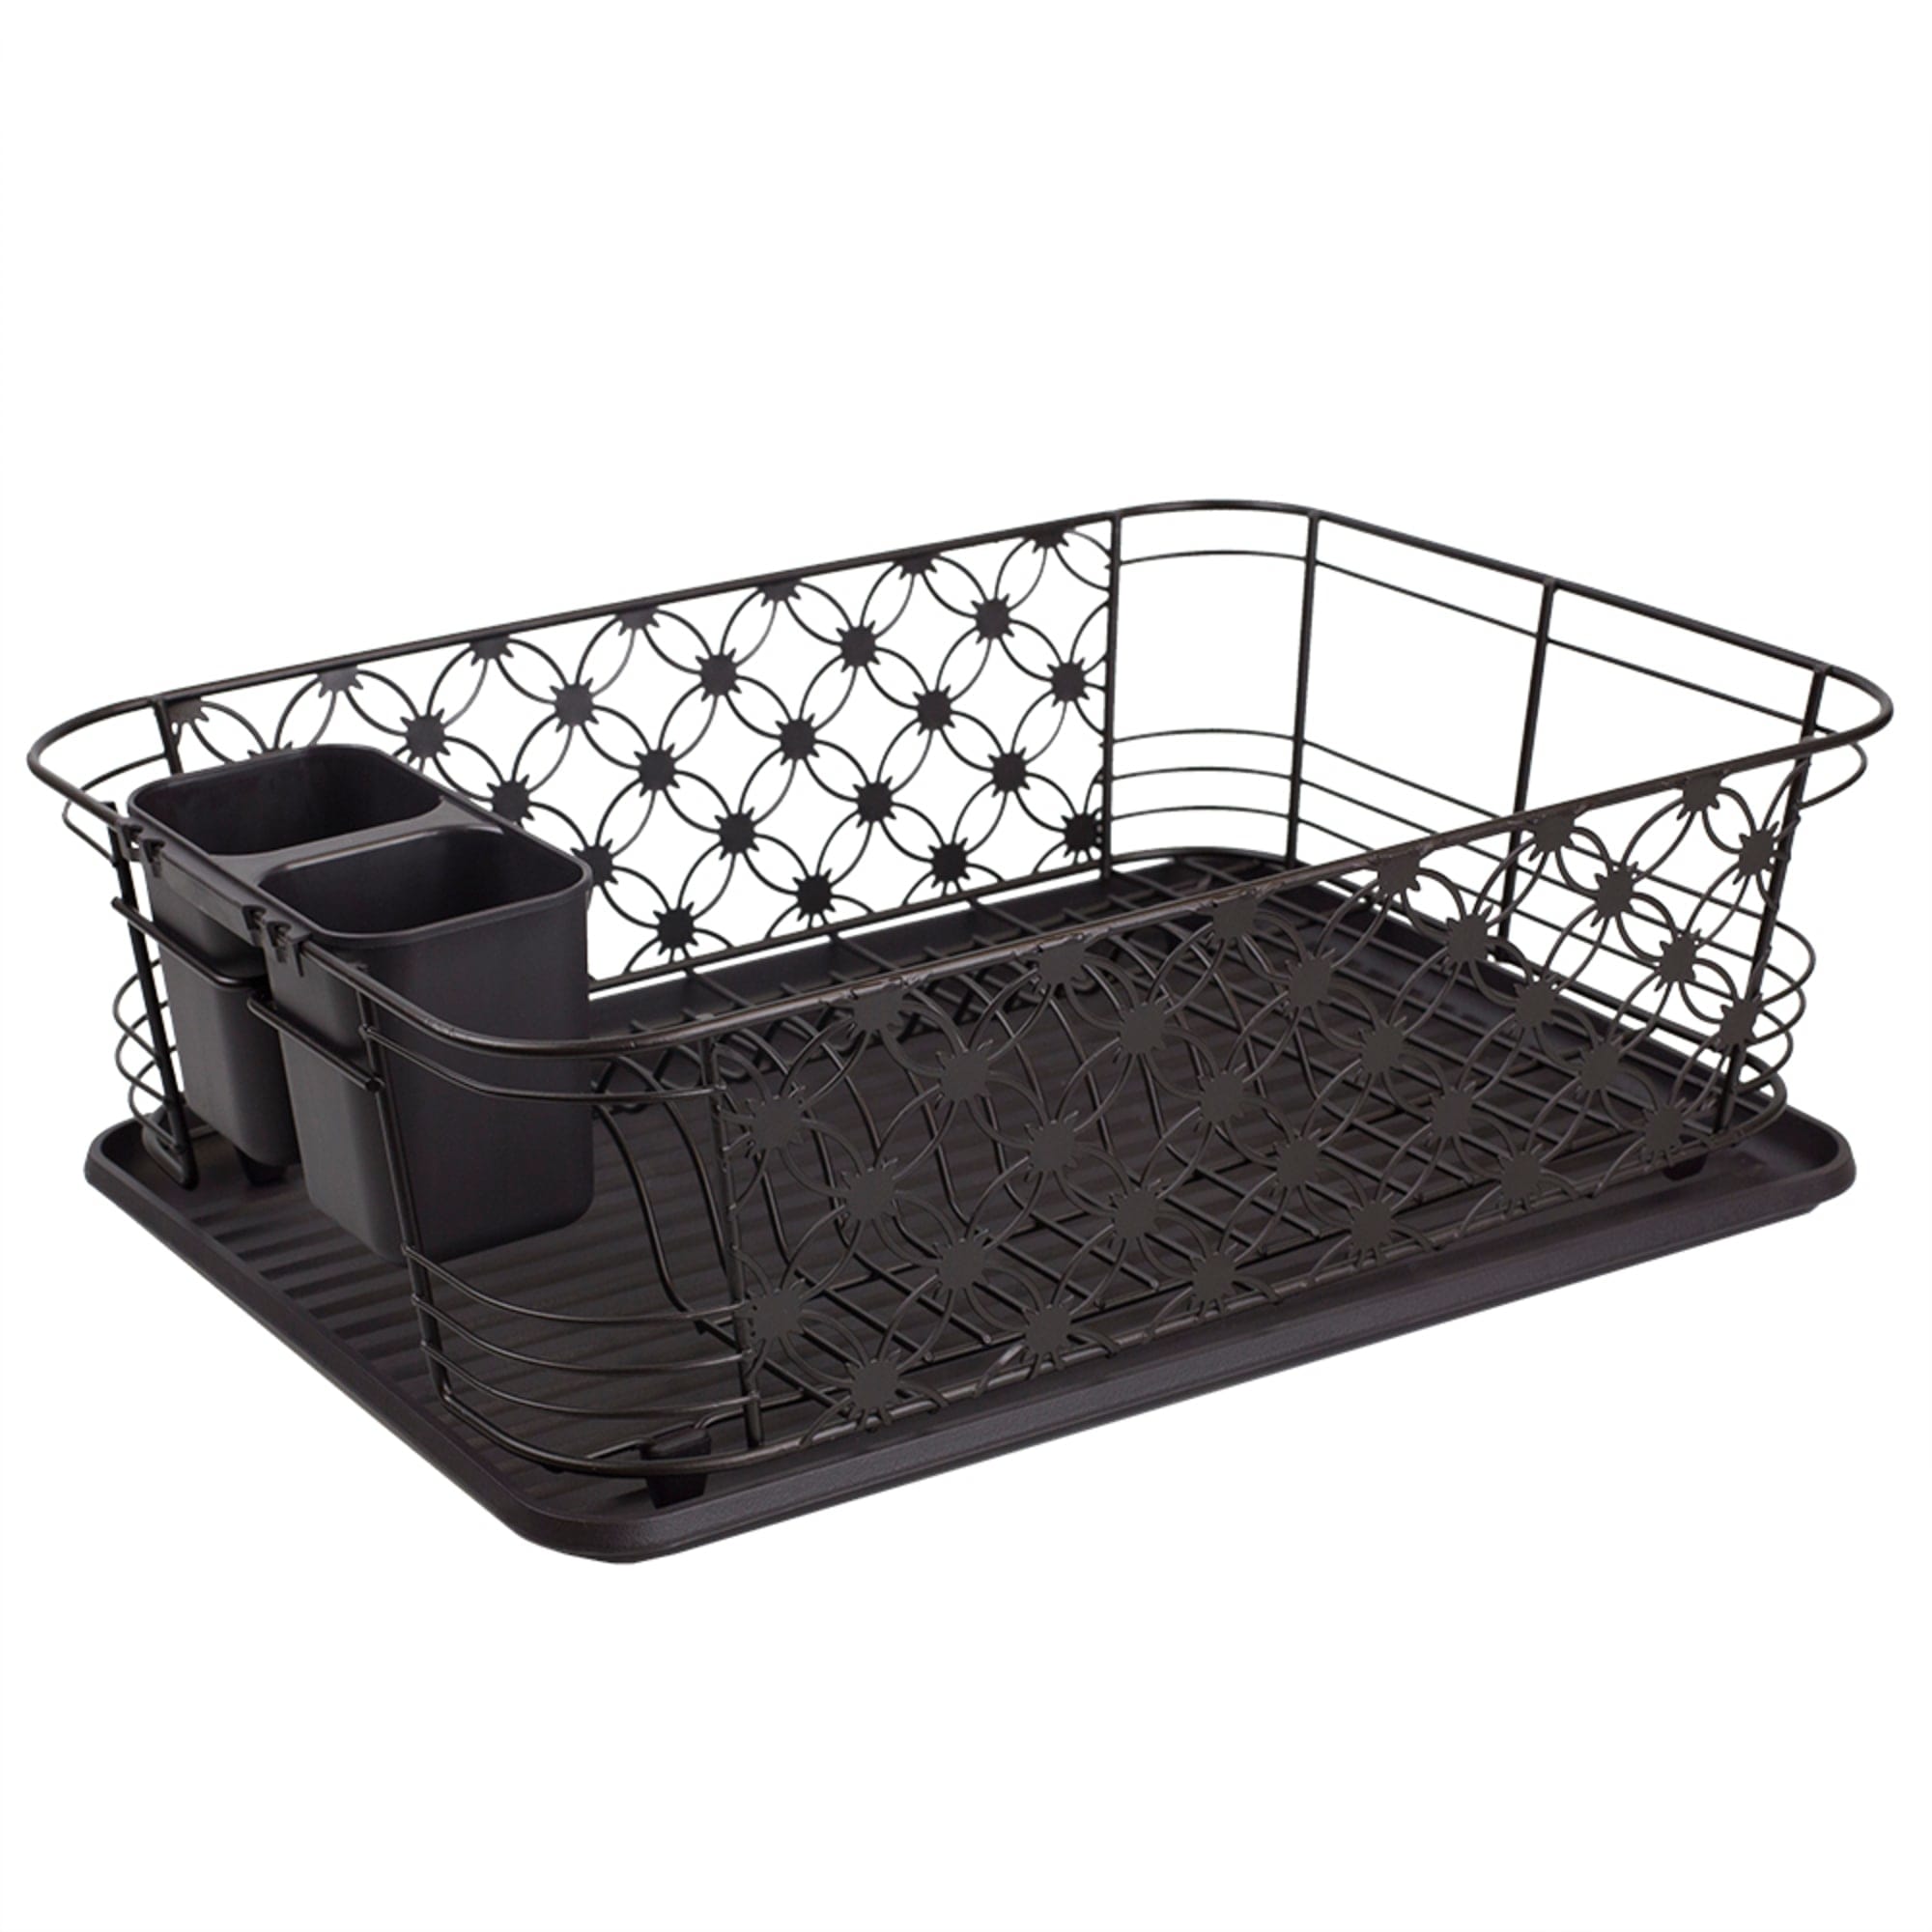 Home Basics 3 Piece Decorative Wire Steel Dish Rack, Bronze $15.00 EACH, CASE PACK OF 6